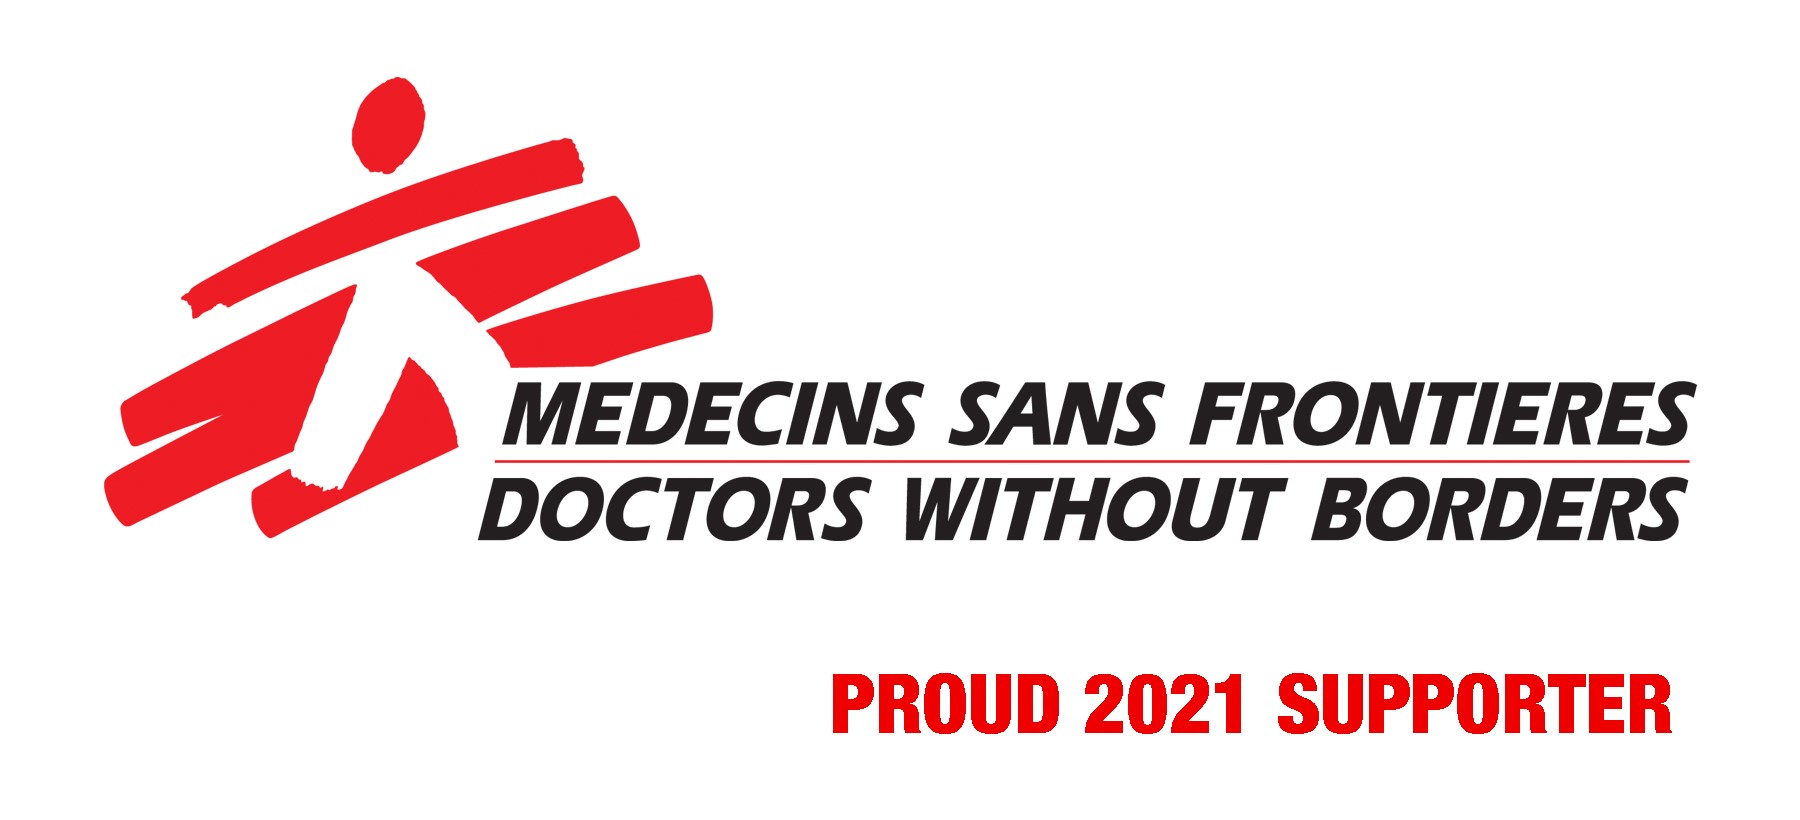 Doctors Without Borders Logo